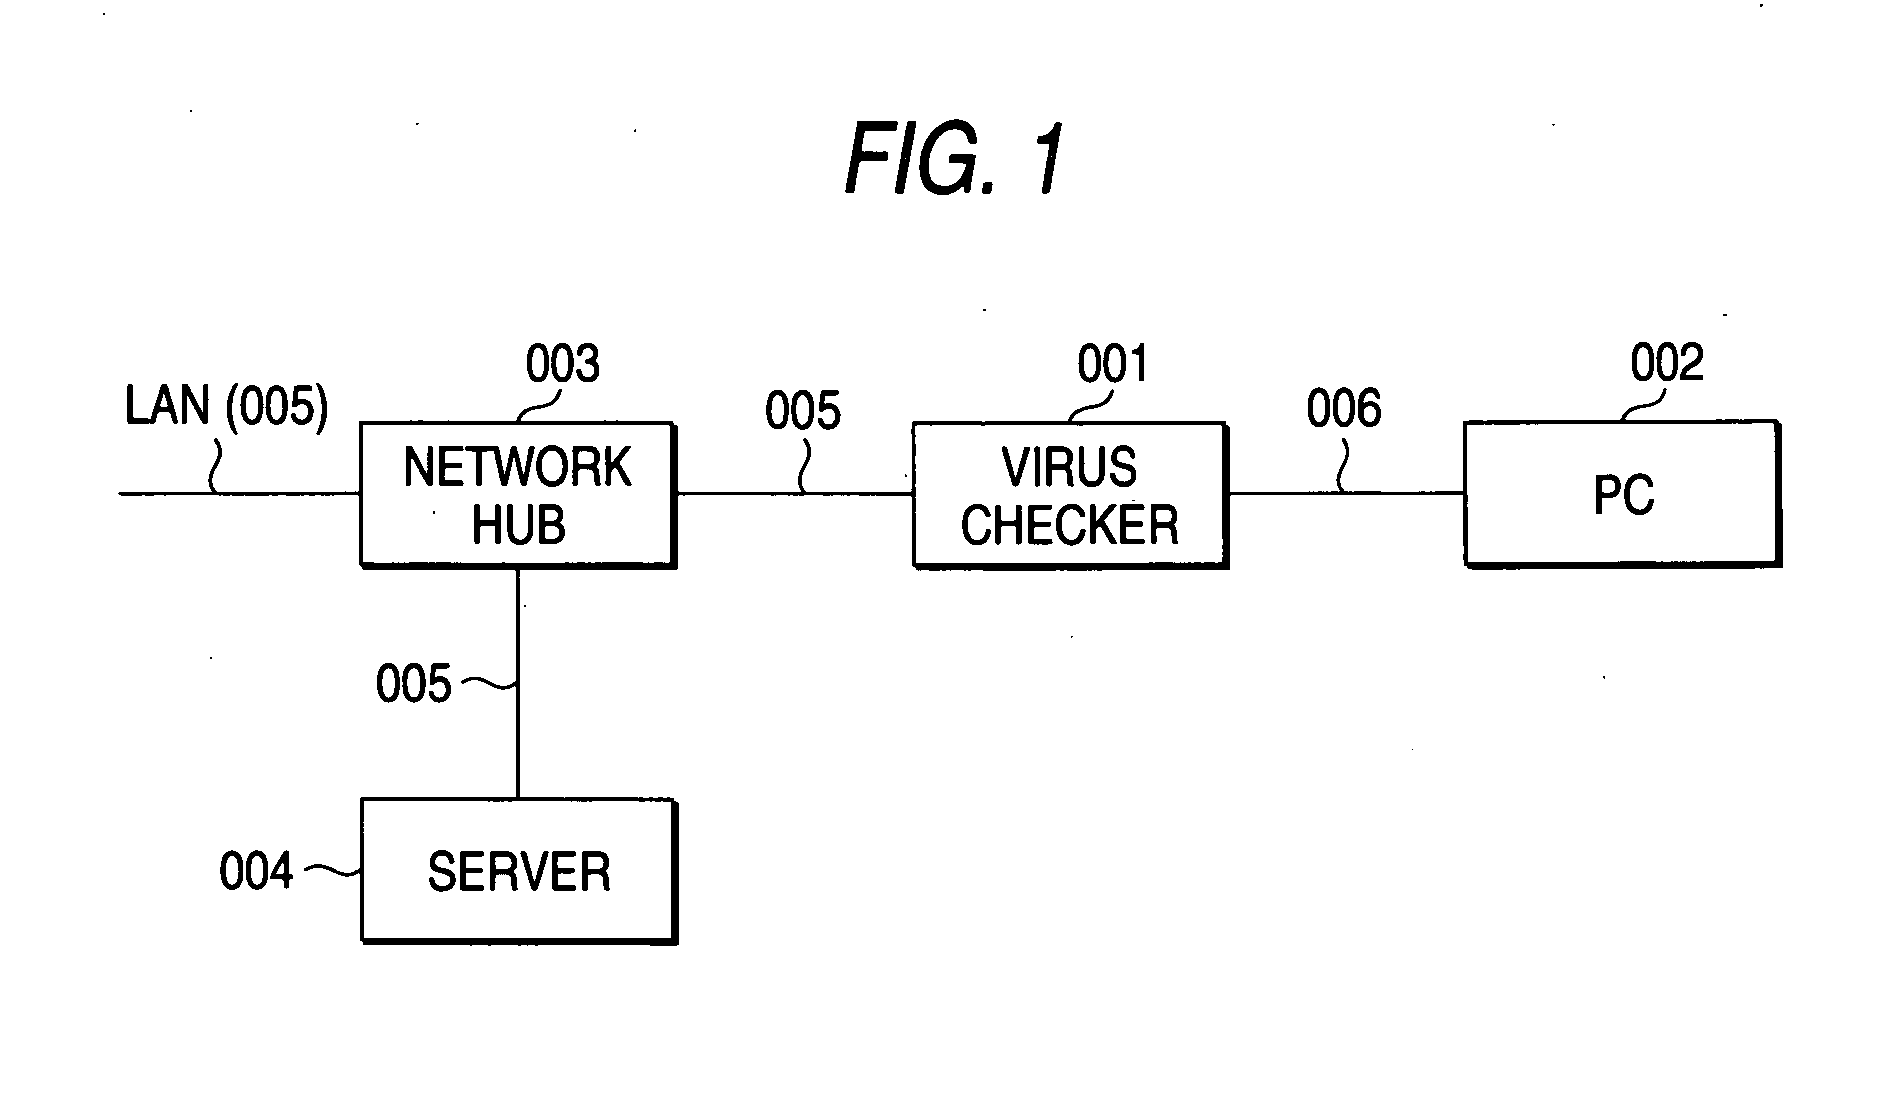 Virus check device and system